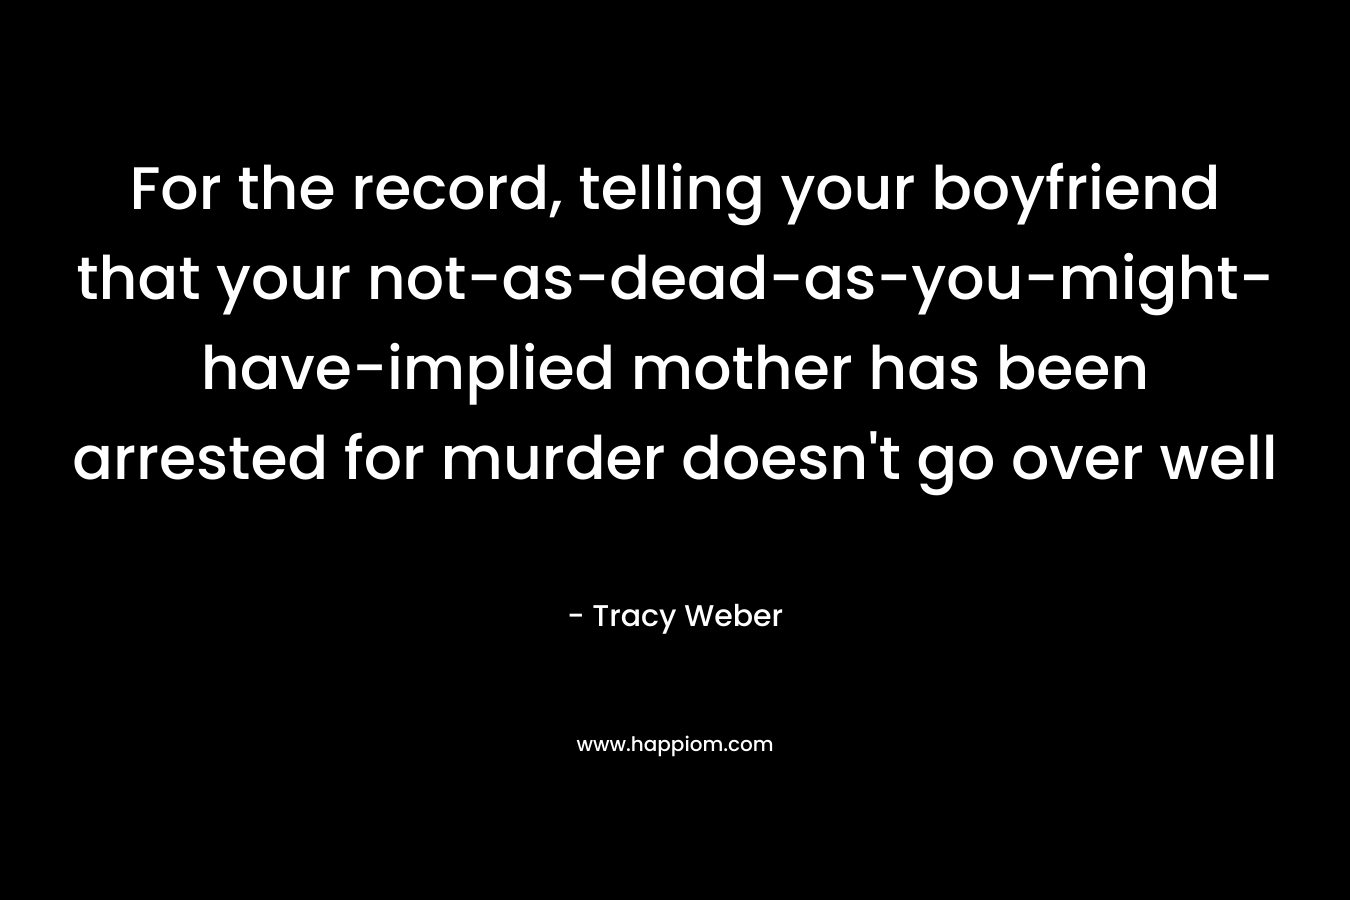 For the record, telling your boyfriend that your not-as-dead-as-you-might-have-implied mother has been arrested for murder doesn’t go over well – Tracy Weber